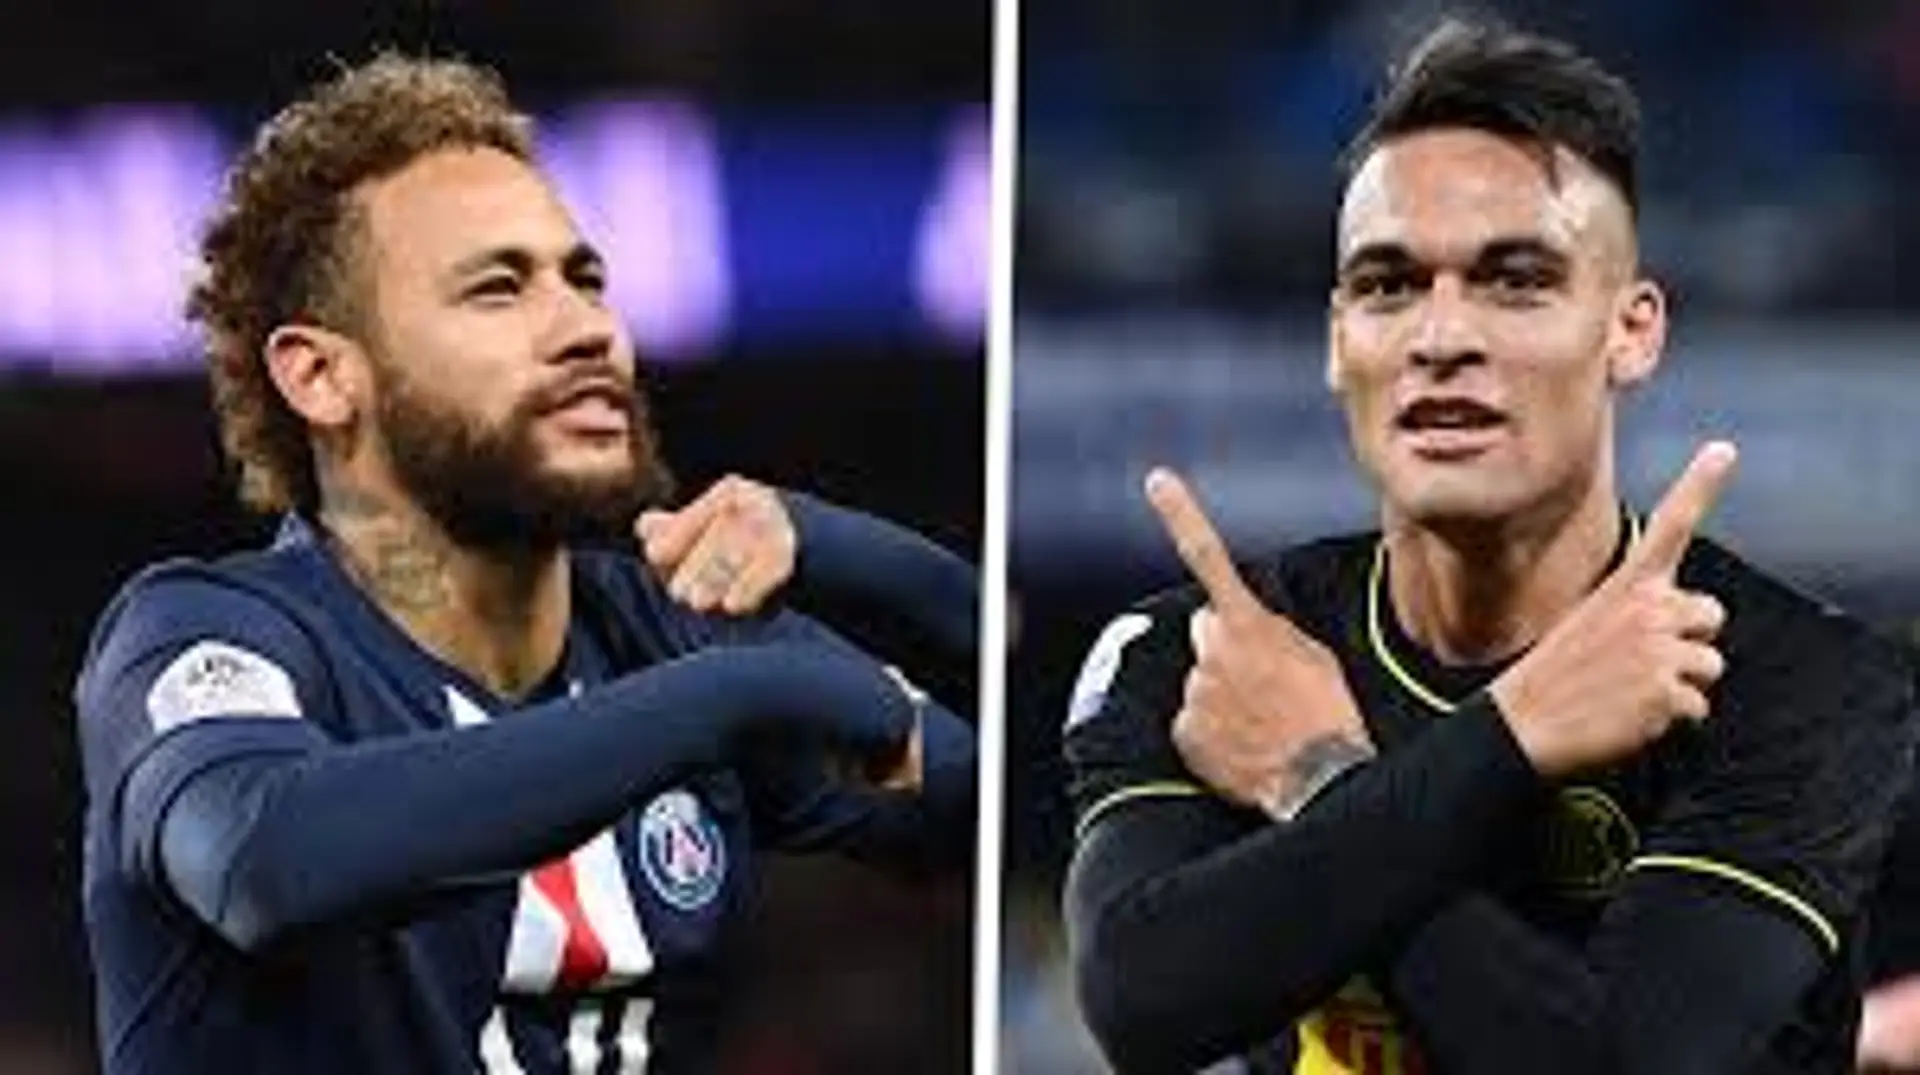 Who should be barca's priority: Neymar or Martinez?